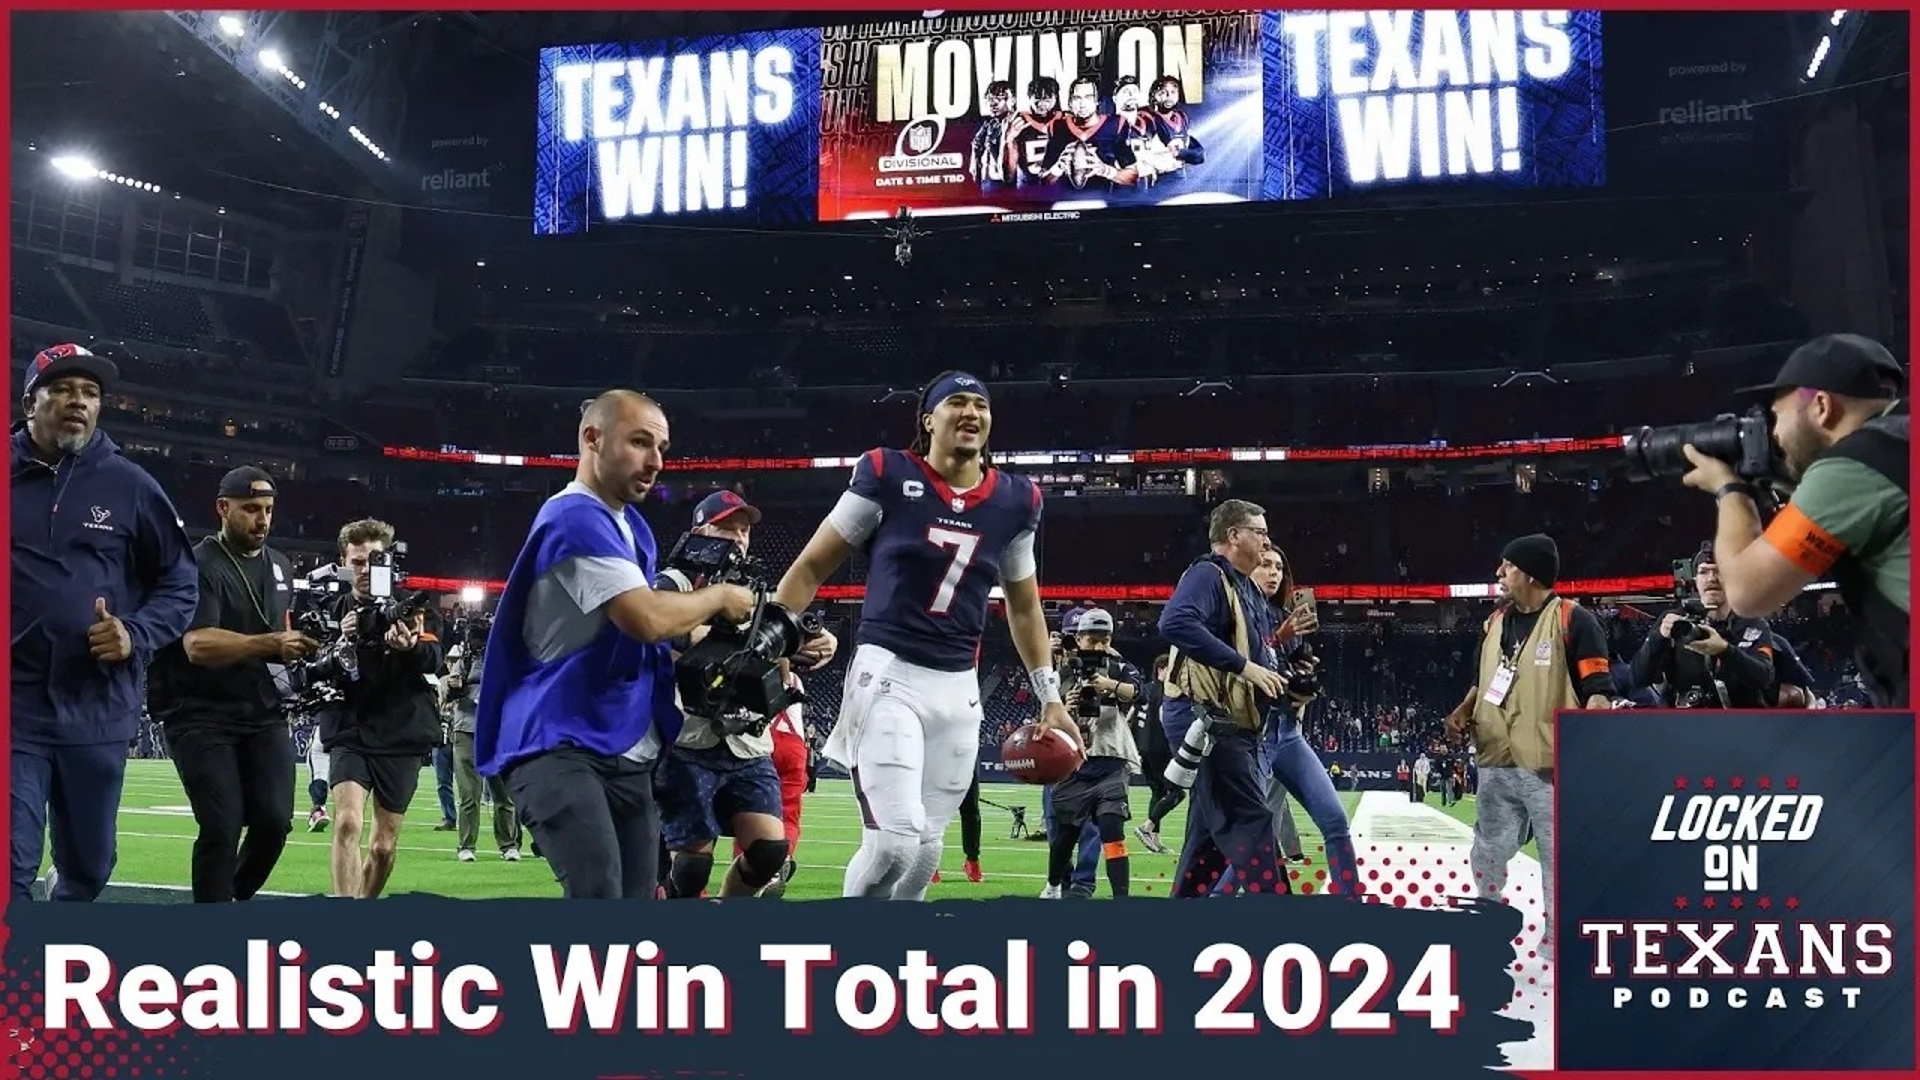 The Houston Texans ended the 2023 season by winning 10 games and taking the helm as AFC South champions.